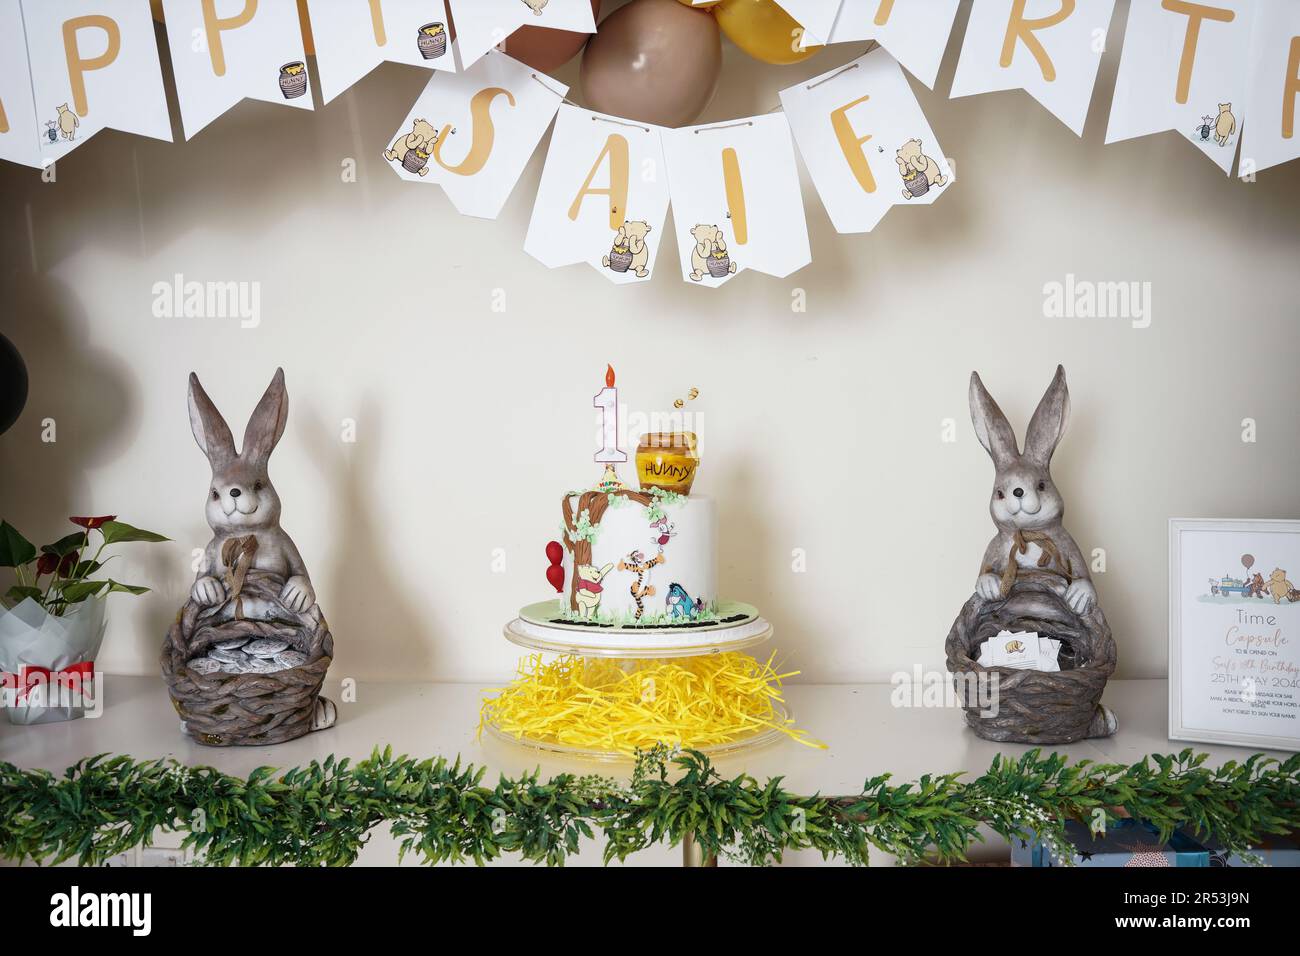 Kids Winnie the pooh birthday party. birthday party boy theme decoration, cake art with table and festive Stock Photo